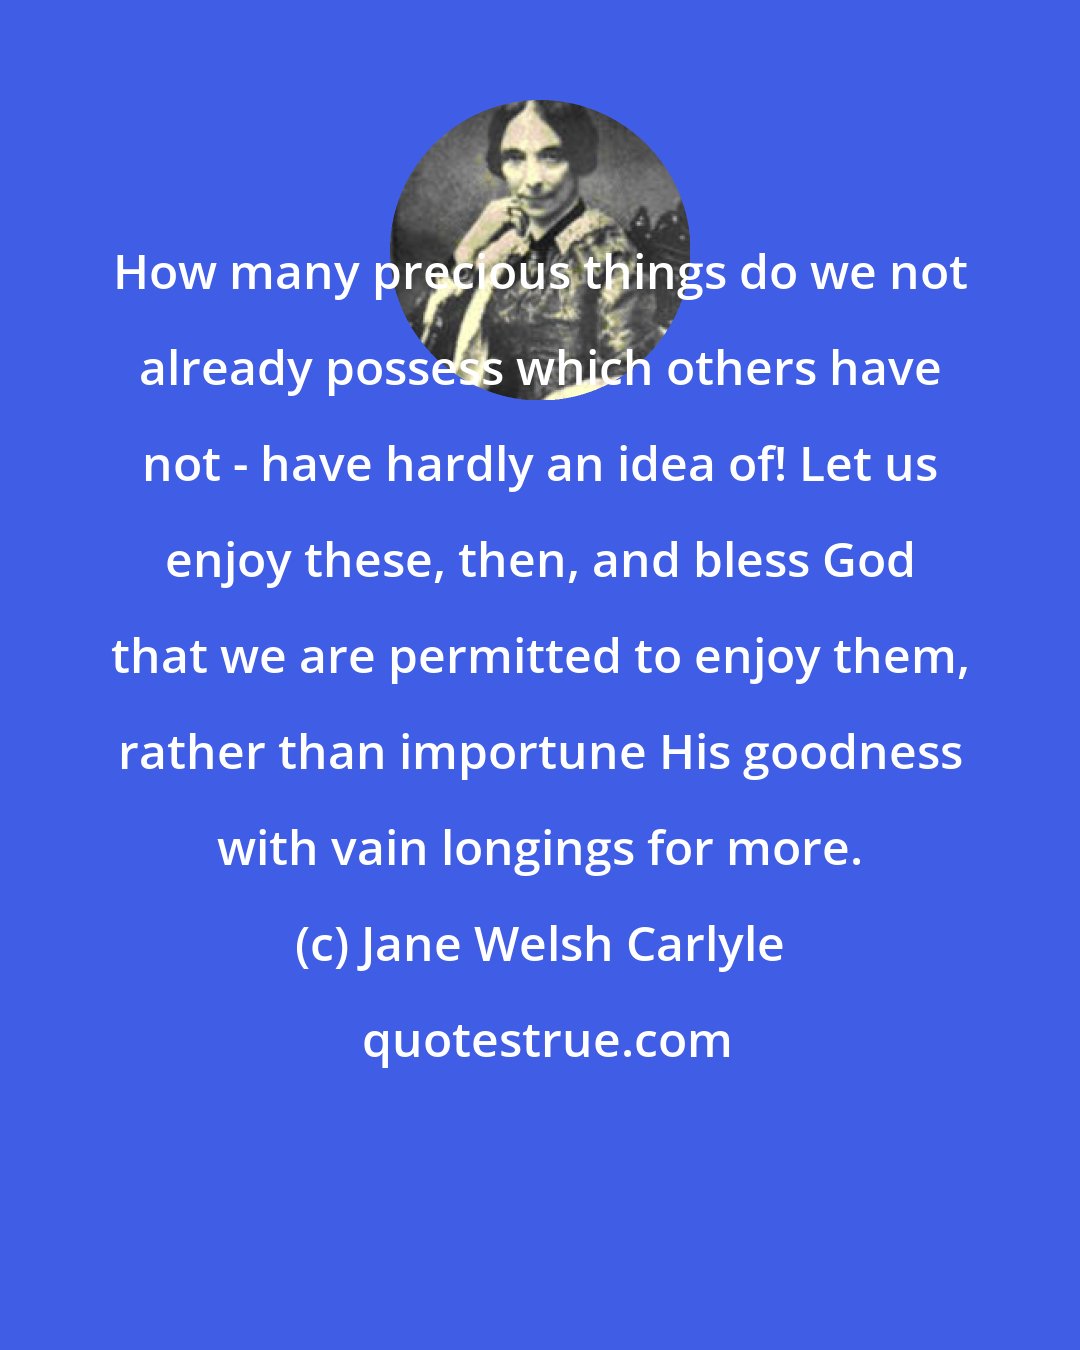 Jane Welsh Carlyle: How many precious things do we not already possess which others have not - have hardly an idea of! Let us enjoy these, then, and bless God that we are permitted to enjoy them, rather than importune His goodness with vain longings for more.